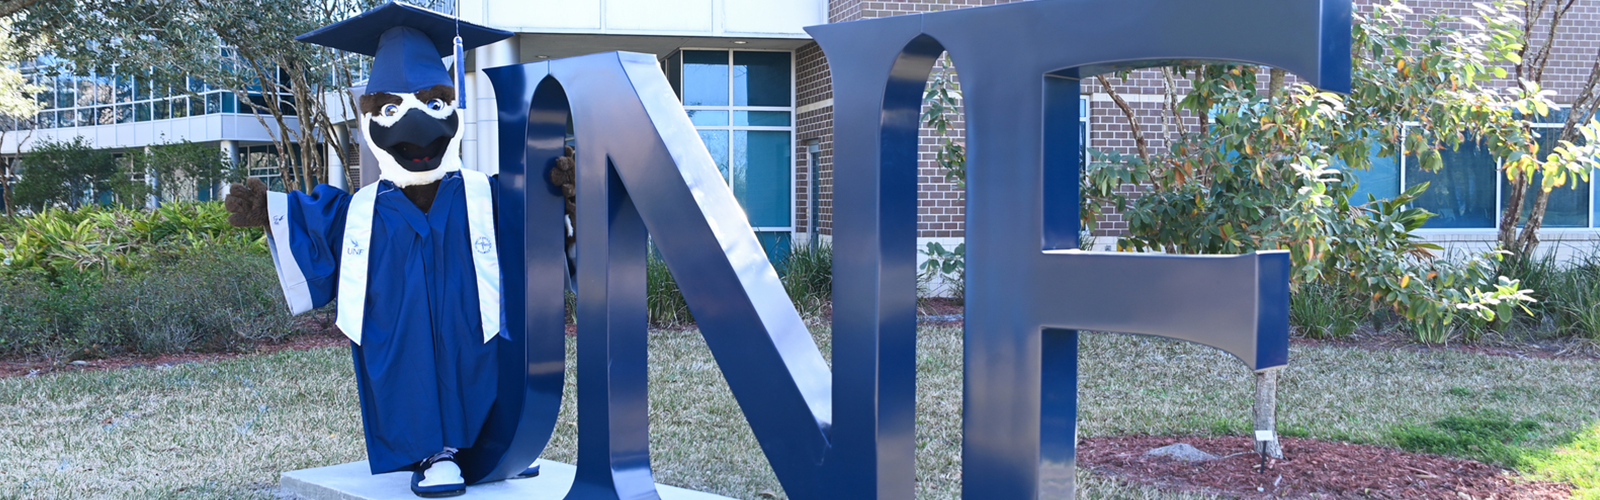 Ozzie standing on the UNF sign